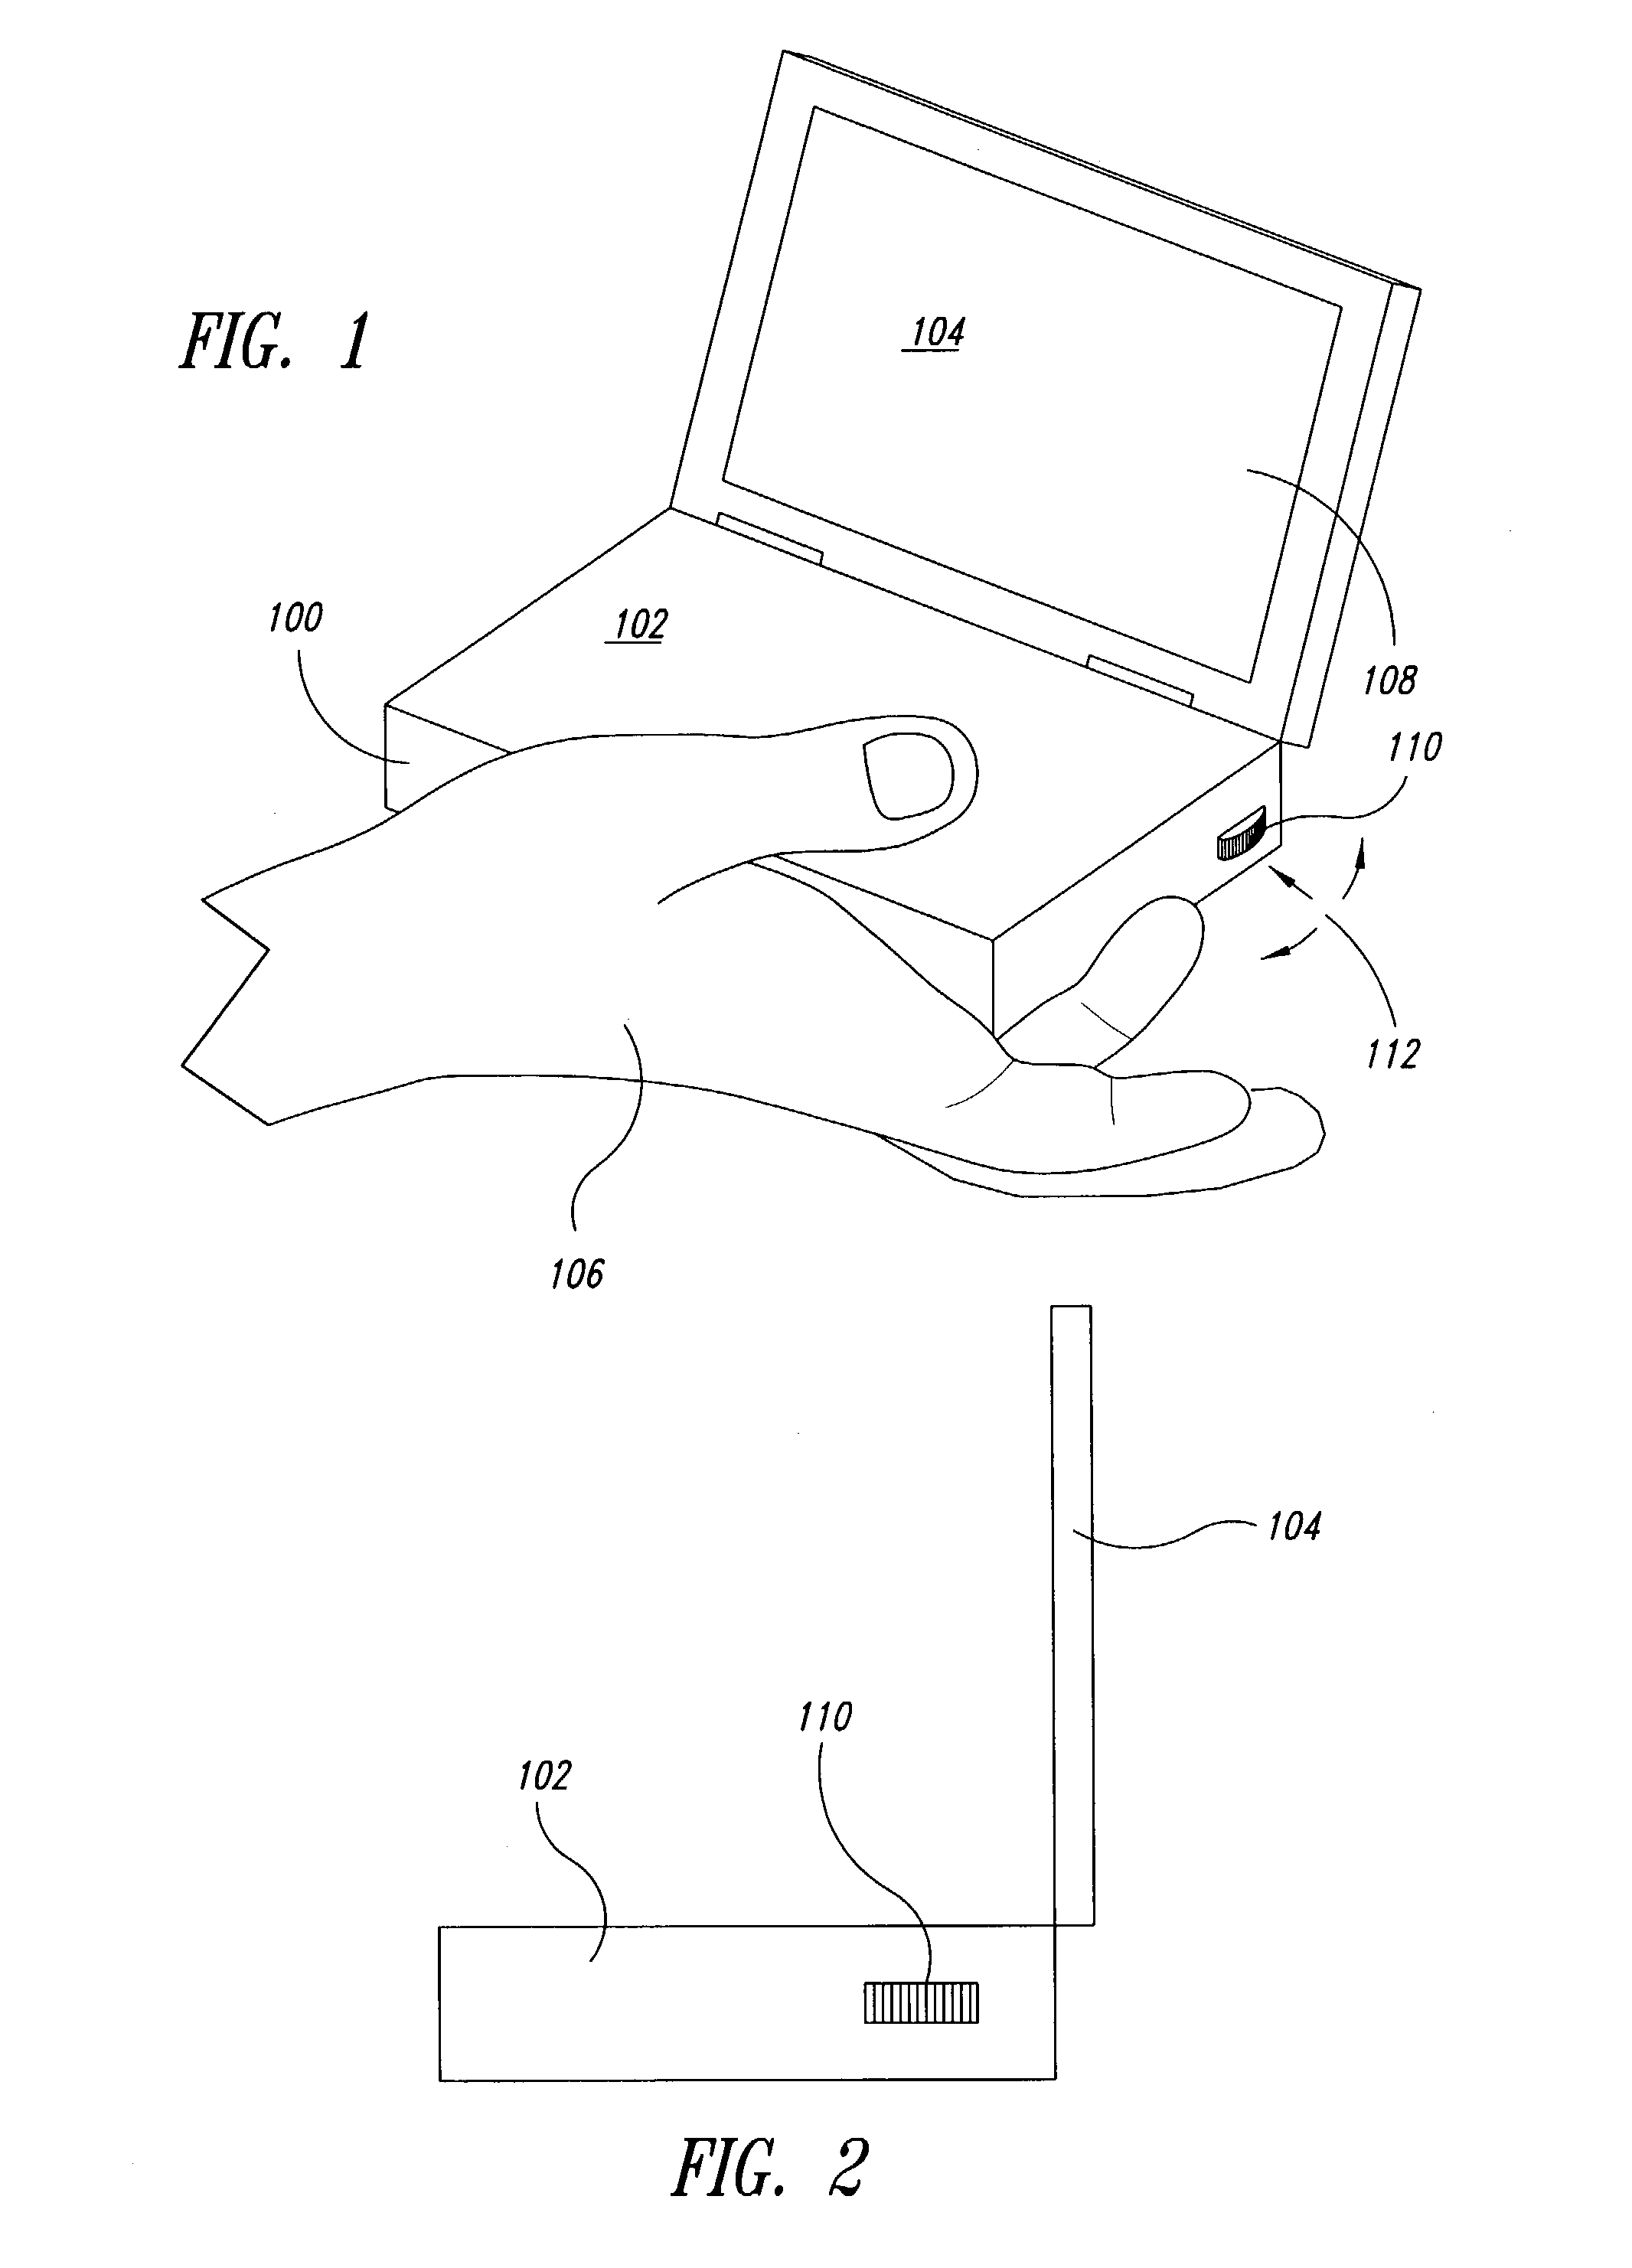 Navigation and selection control for a hand-held portable computer